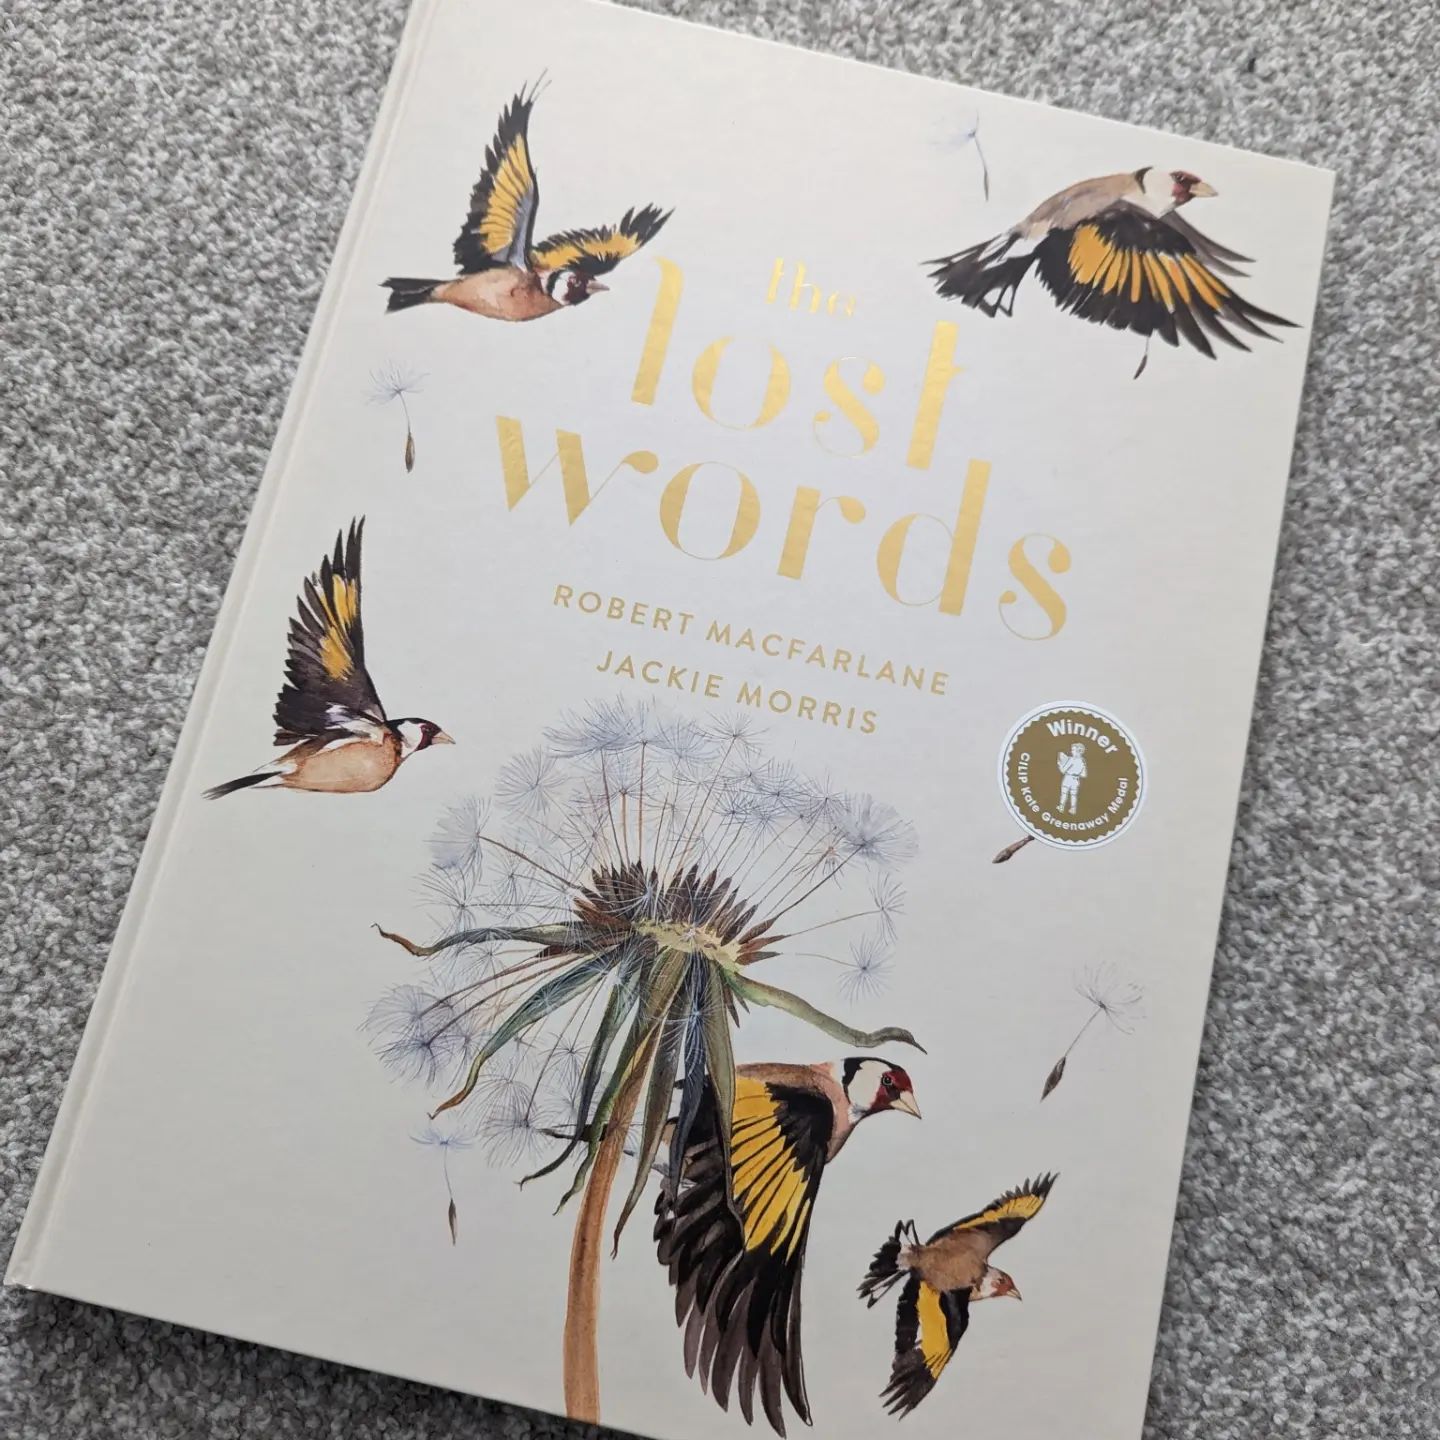 We popped into @bertsbooks yesterday in Old Town so the eldest could spend his national book tokens, both children found new authors and have been squirreled away ever since...As we left we were gifted this beautifully illustrated book, The Lost Words by @robgmacfarlane and @jackiemorrisartist - I think we might get lost in this one too!#books #bookworm #reading #illustration #gifted #nationalbooktokens